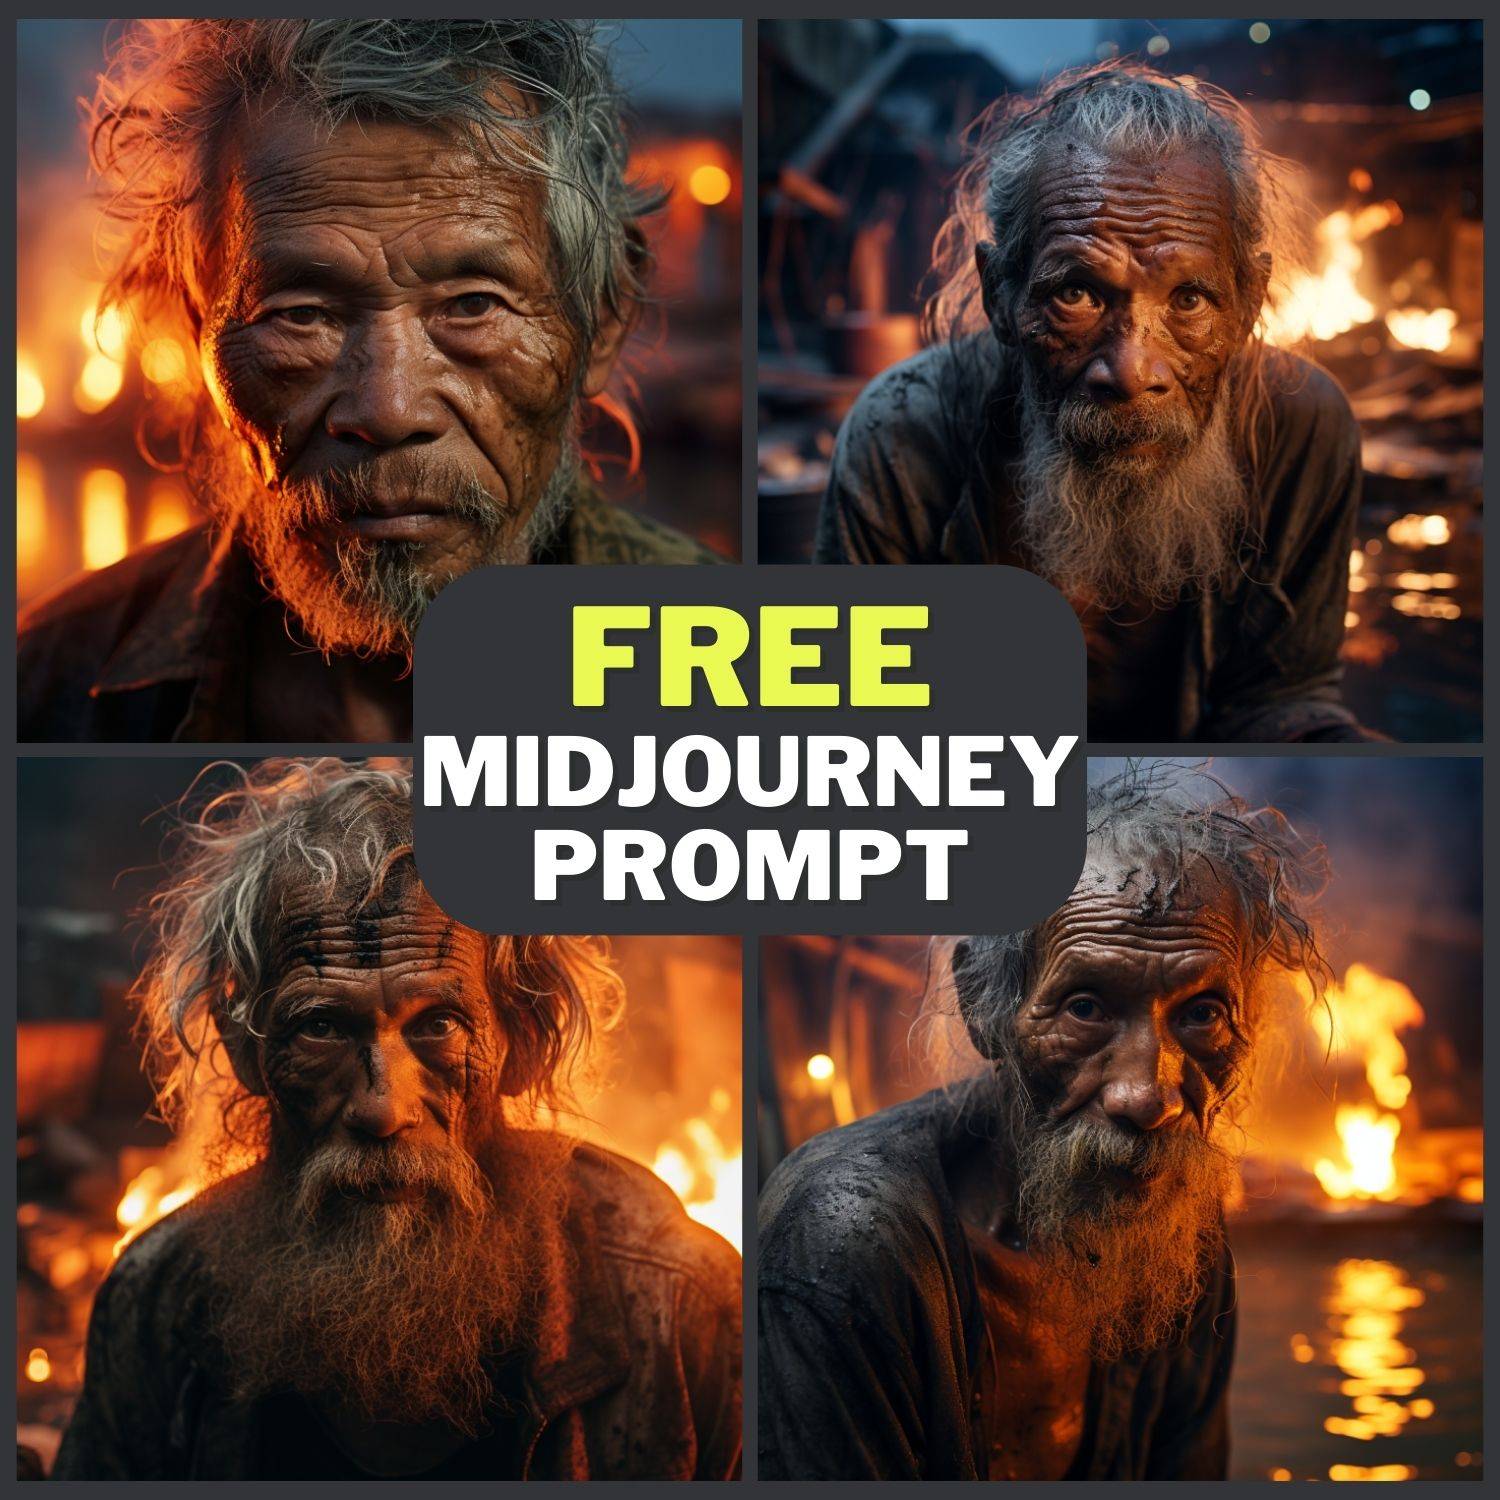 Vietnamese Old Man Face Free Midjourney Prompt 1